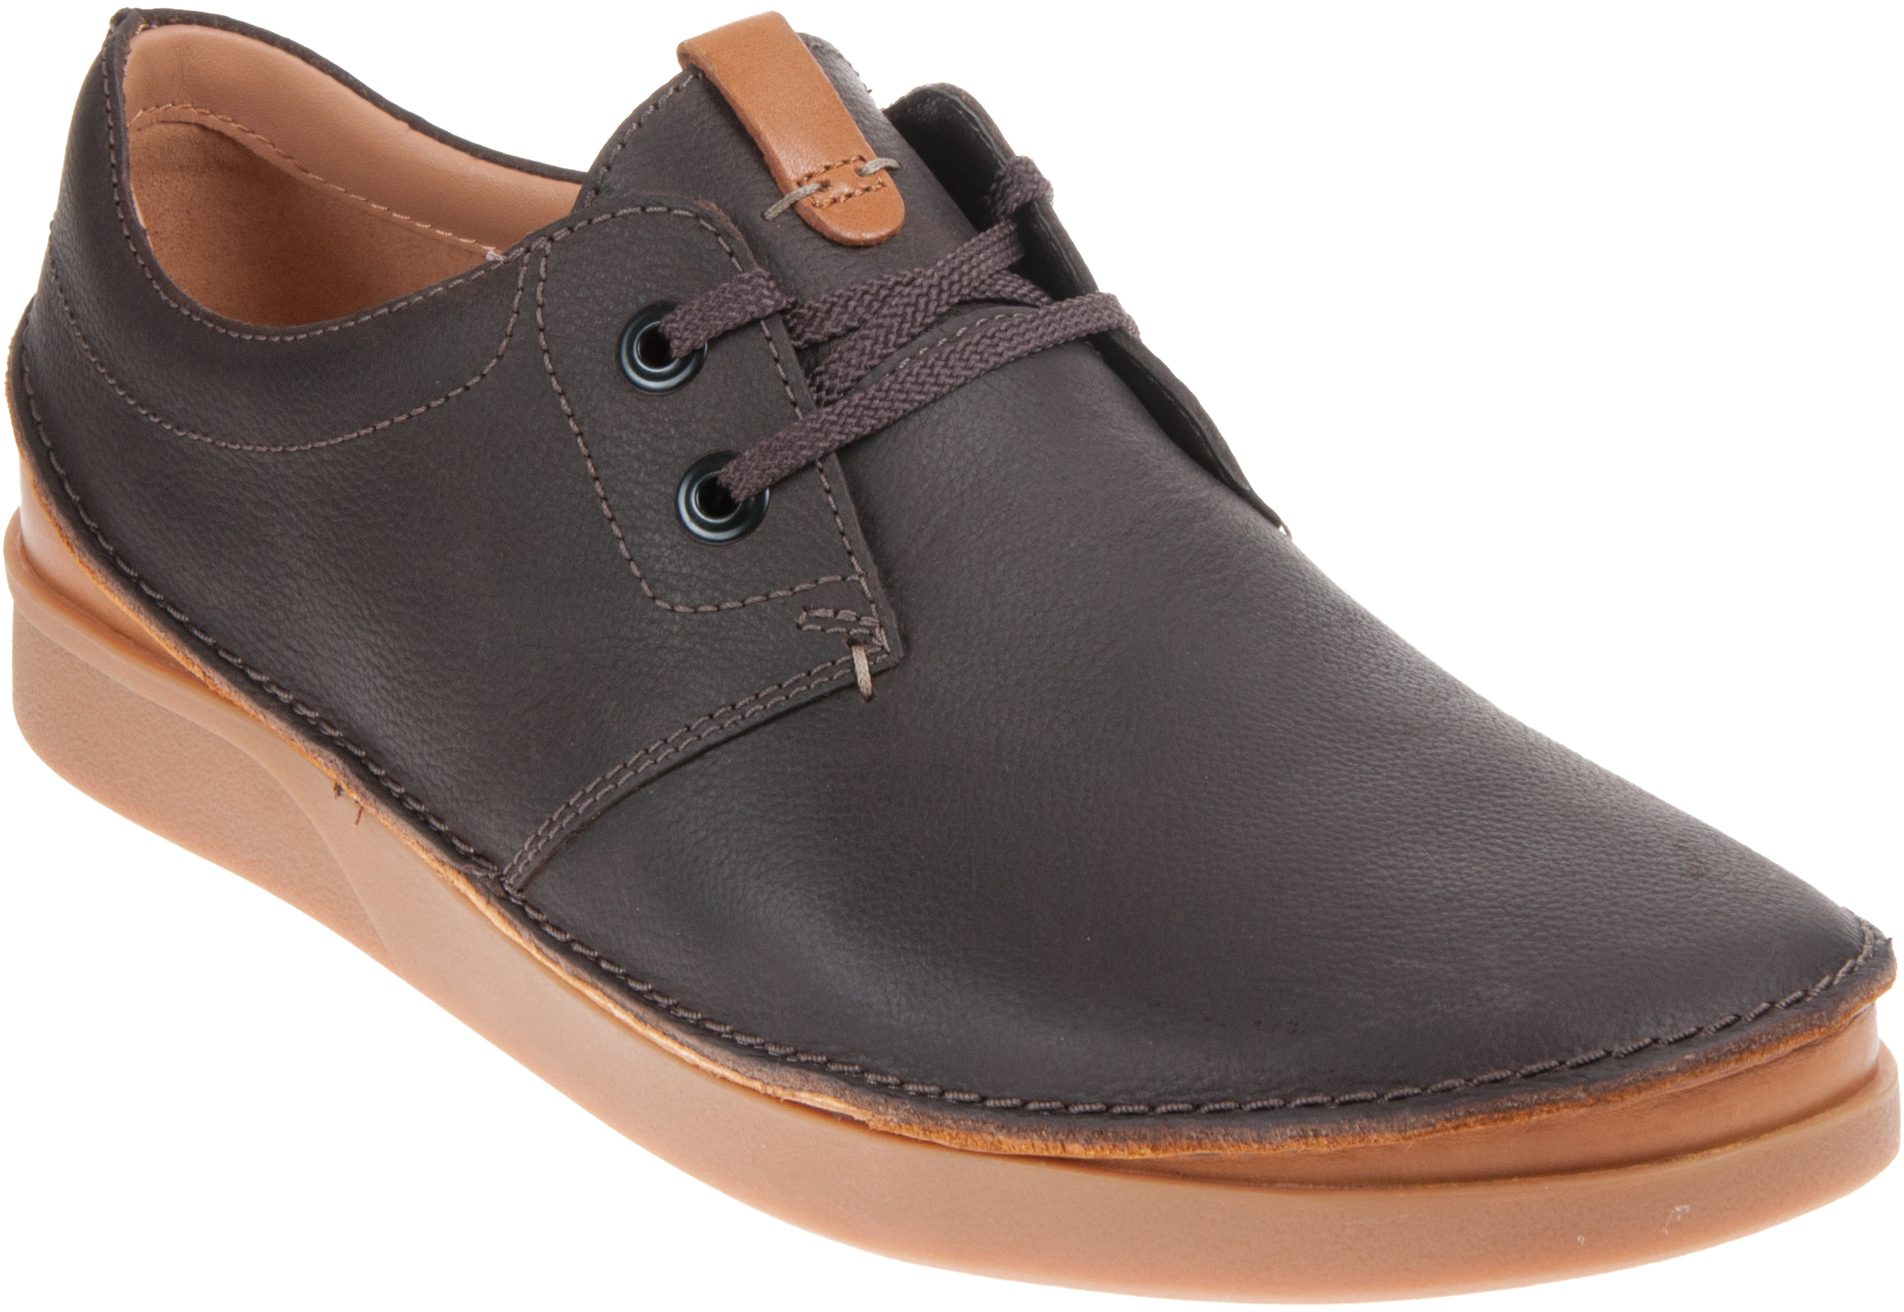 Clarks Oakland Lace Dark Brown Leather 26135393 - Casual Shoes ...